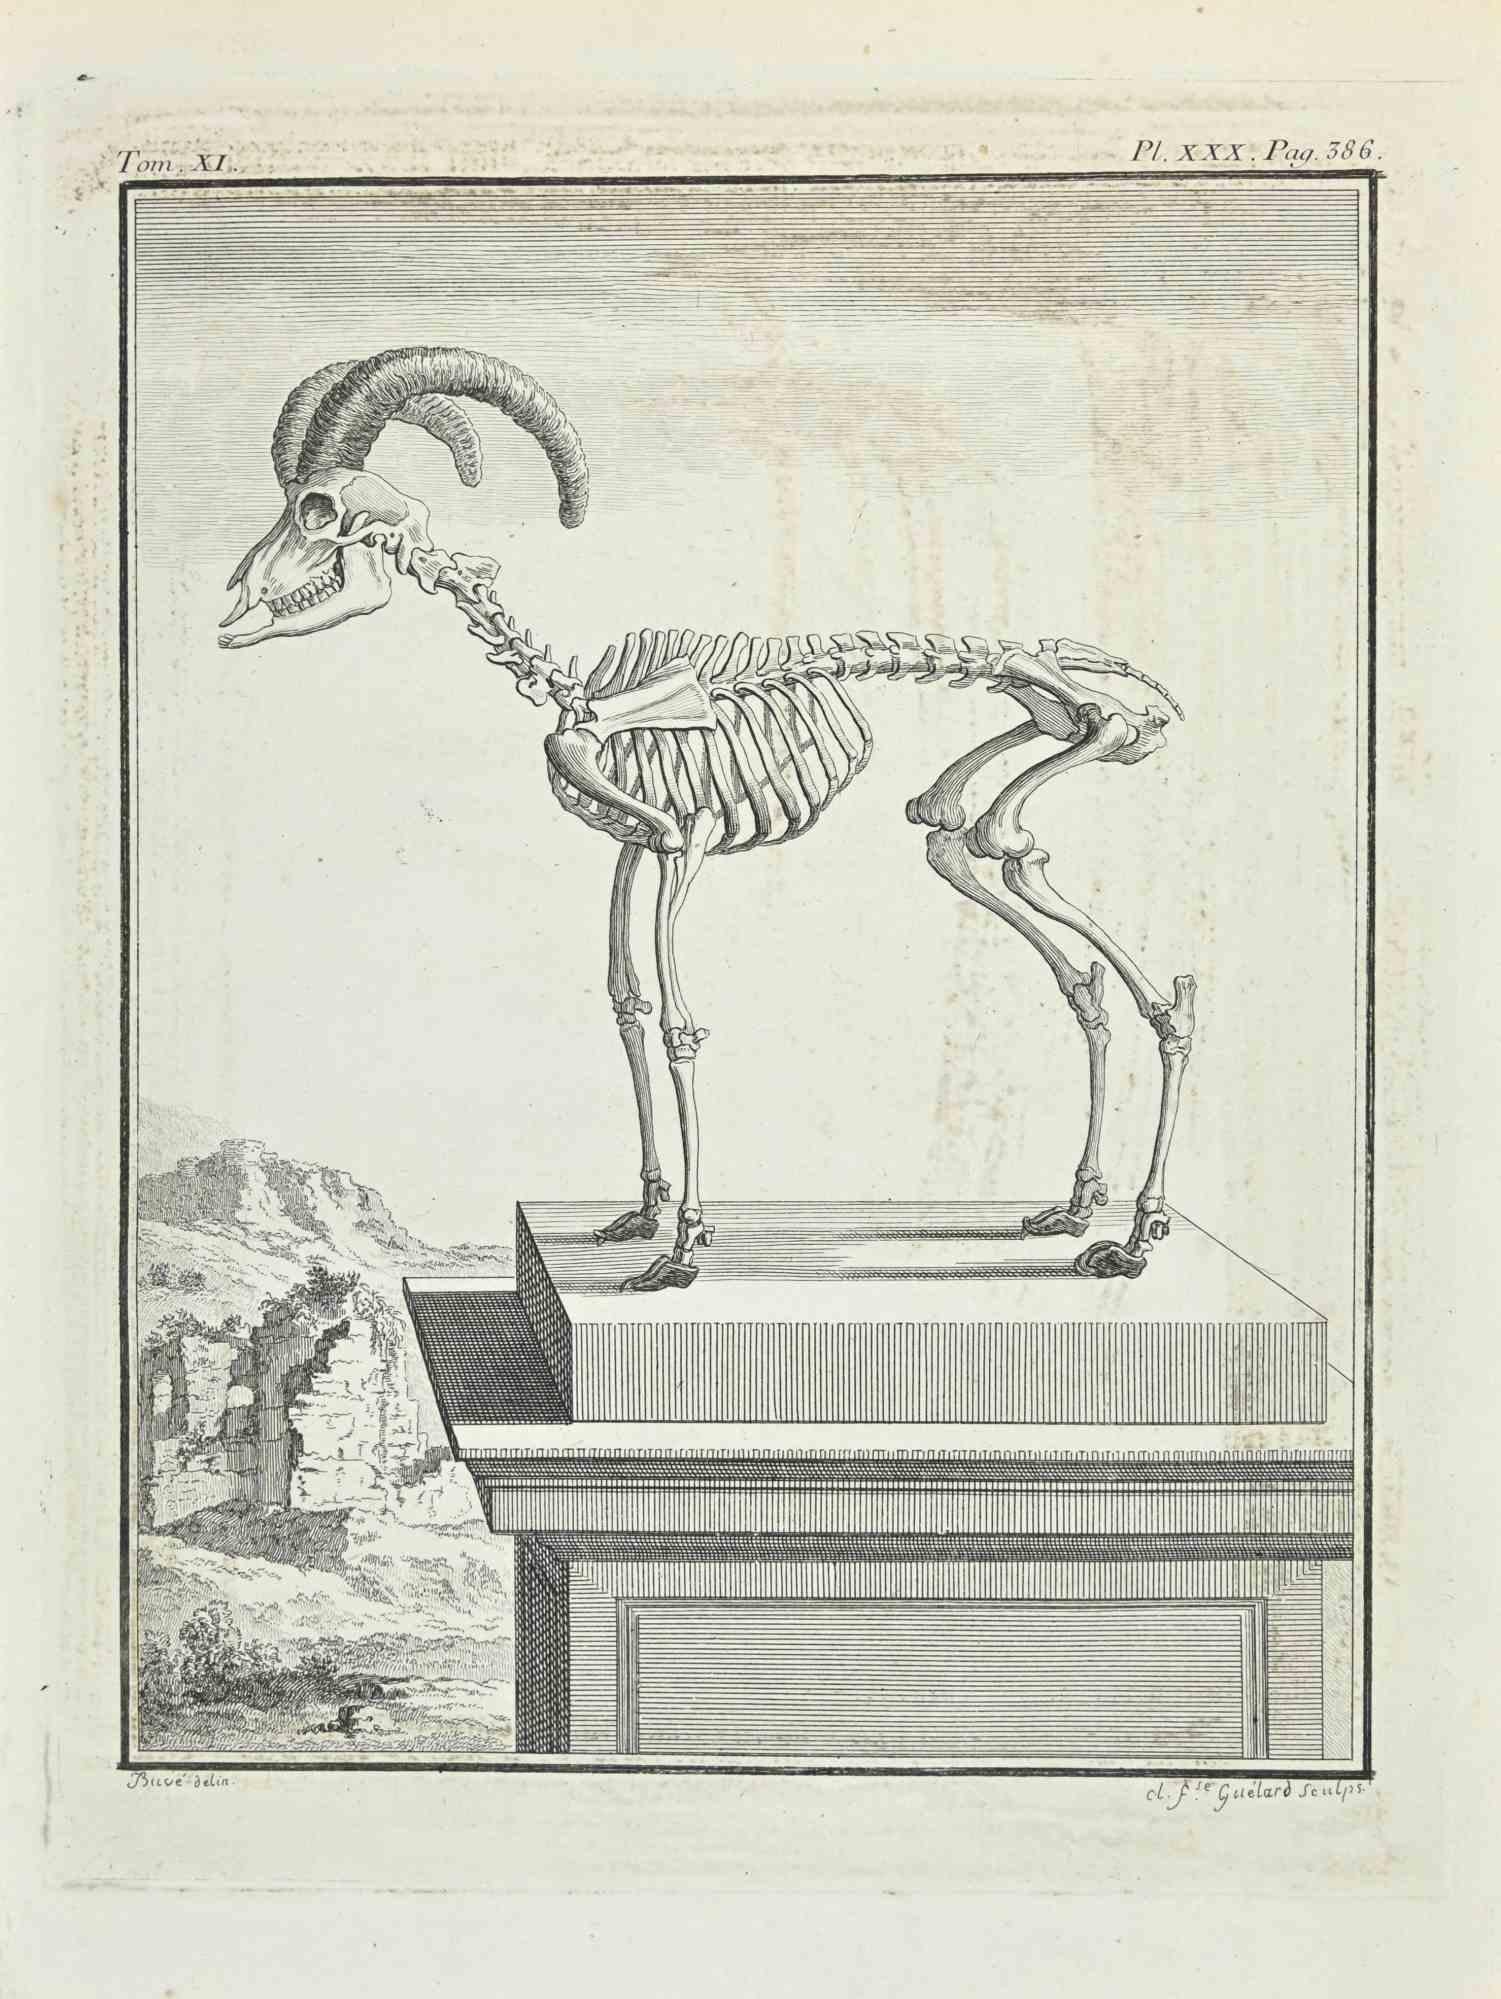 Anatomy is an etching realized by Gaillard in 1771.